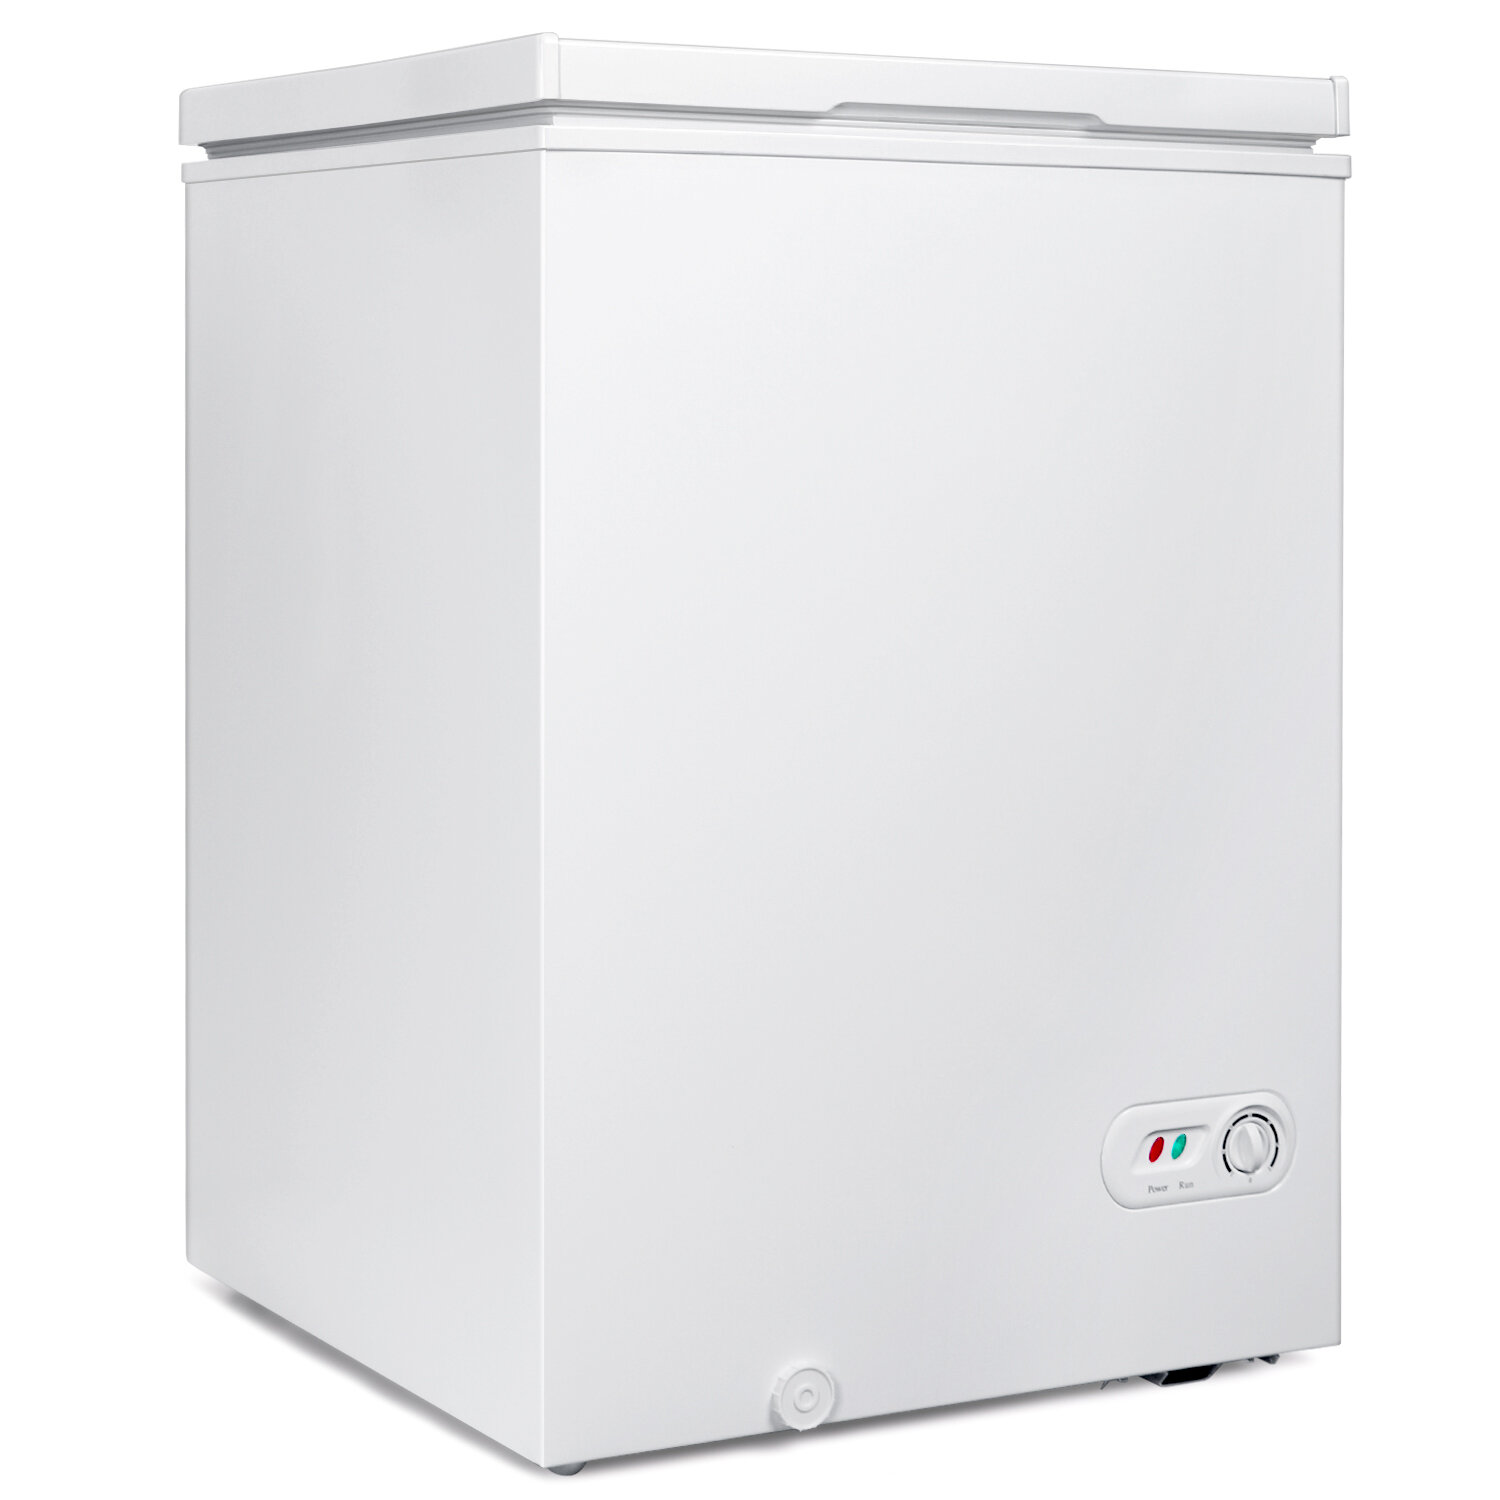 3.5 Cubic Feet Chest Freezer Small Deep Freezers with Removable Storage Basket Free Standing Top Door Compact Freezer 7 Gears Temperature Control